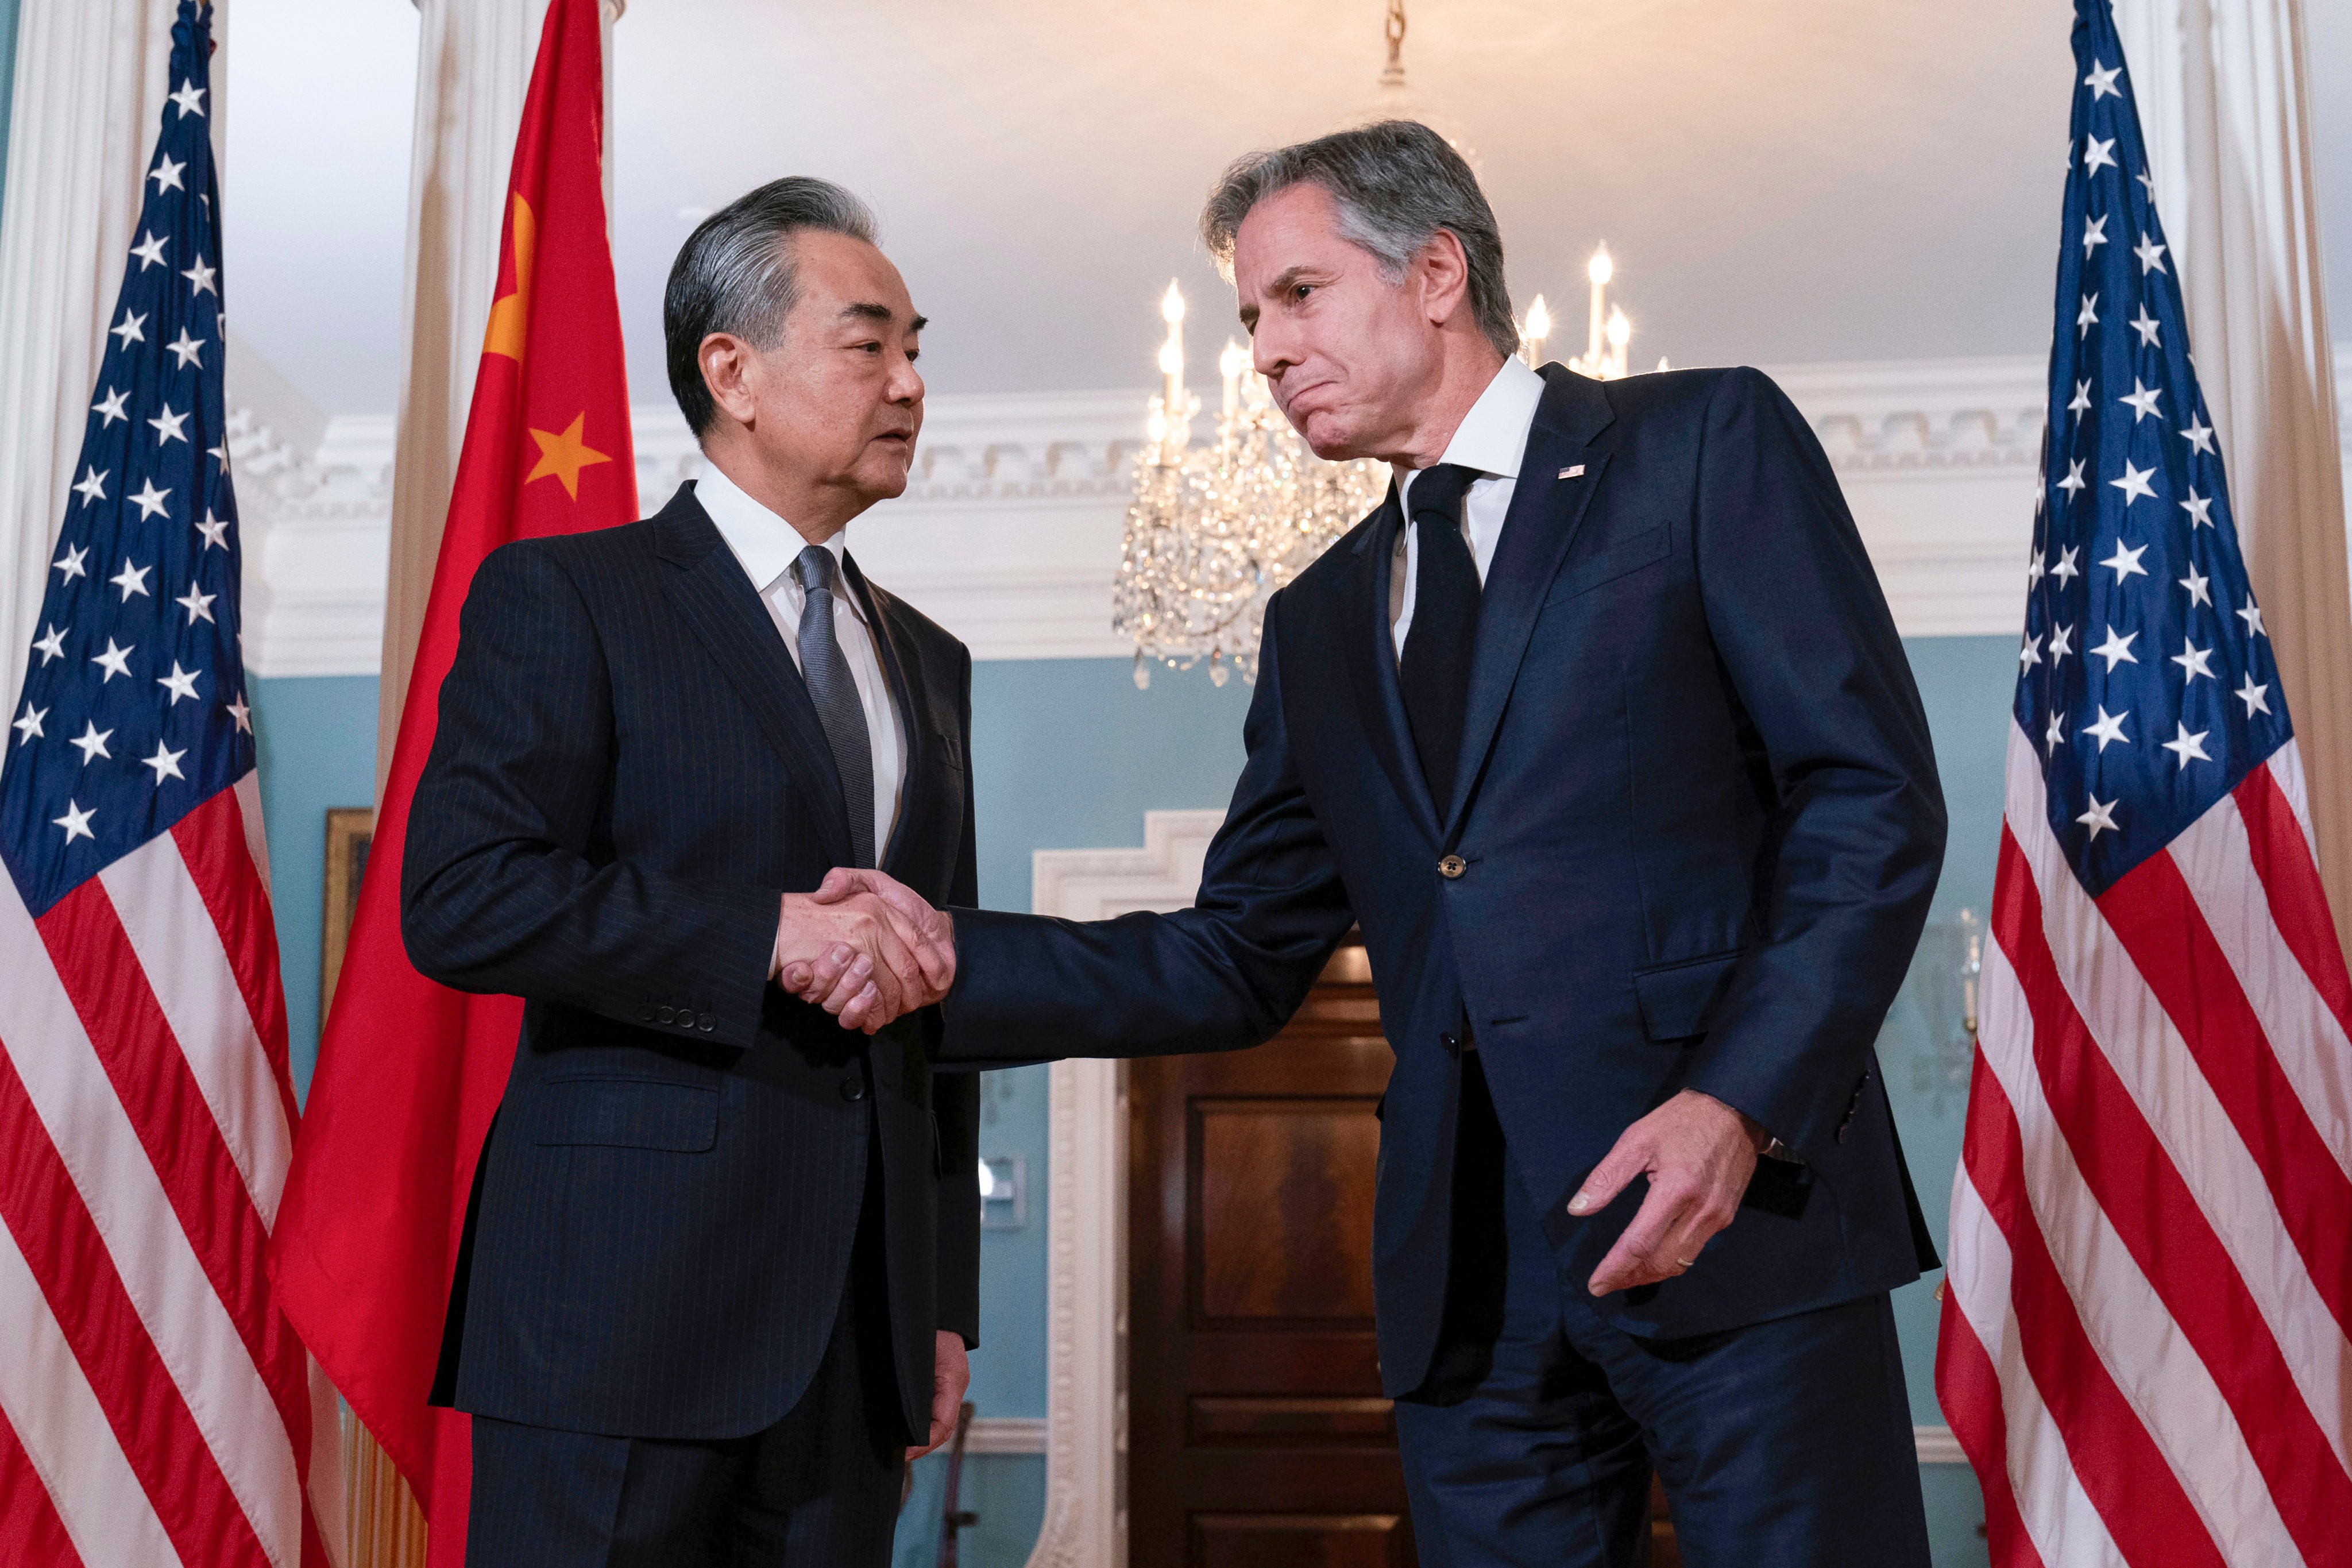 Foreign Minister Wang Yi shakes hands with US Secretary of State Antony Blinken after a meeting at the State Department in Washington on October 26. Photo: AP